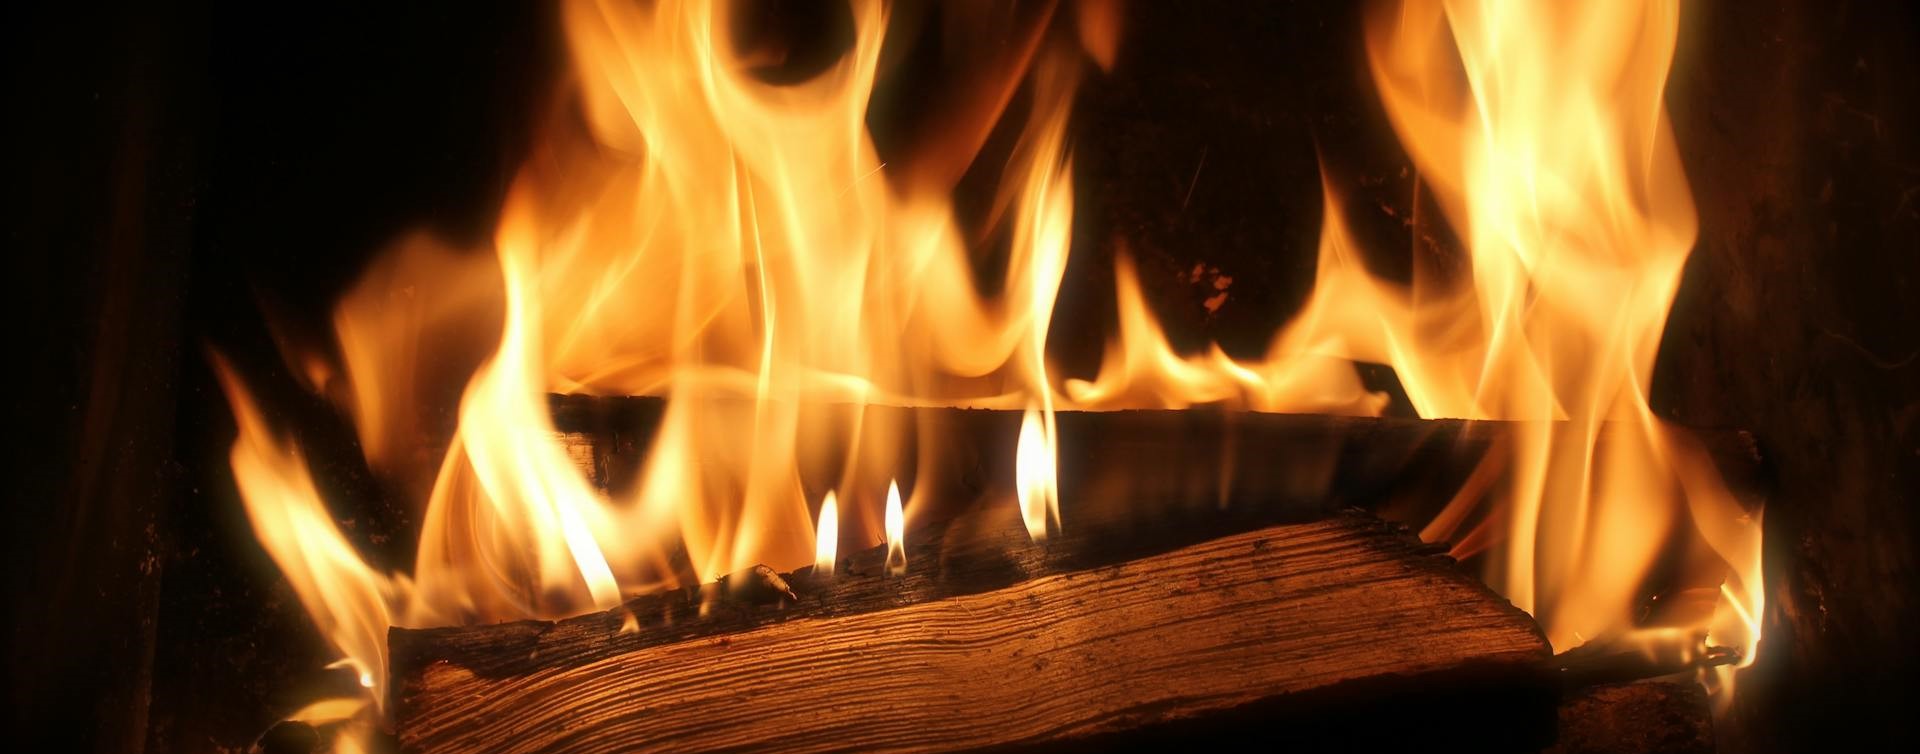 Mastering the Art of Building the Perfect Fire with Kiln-Dried Firewood and Kindling